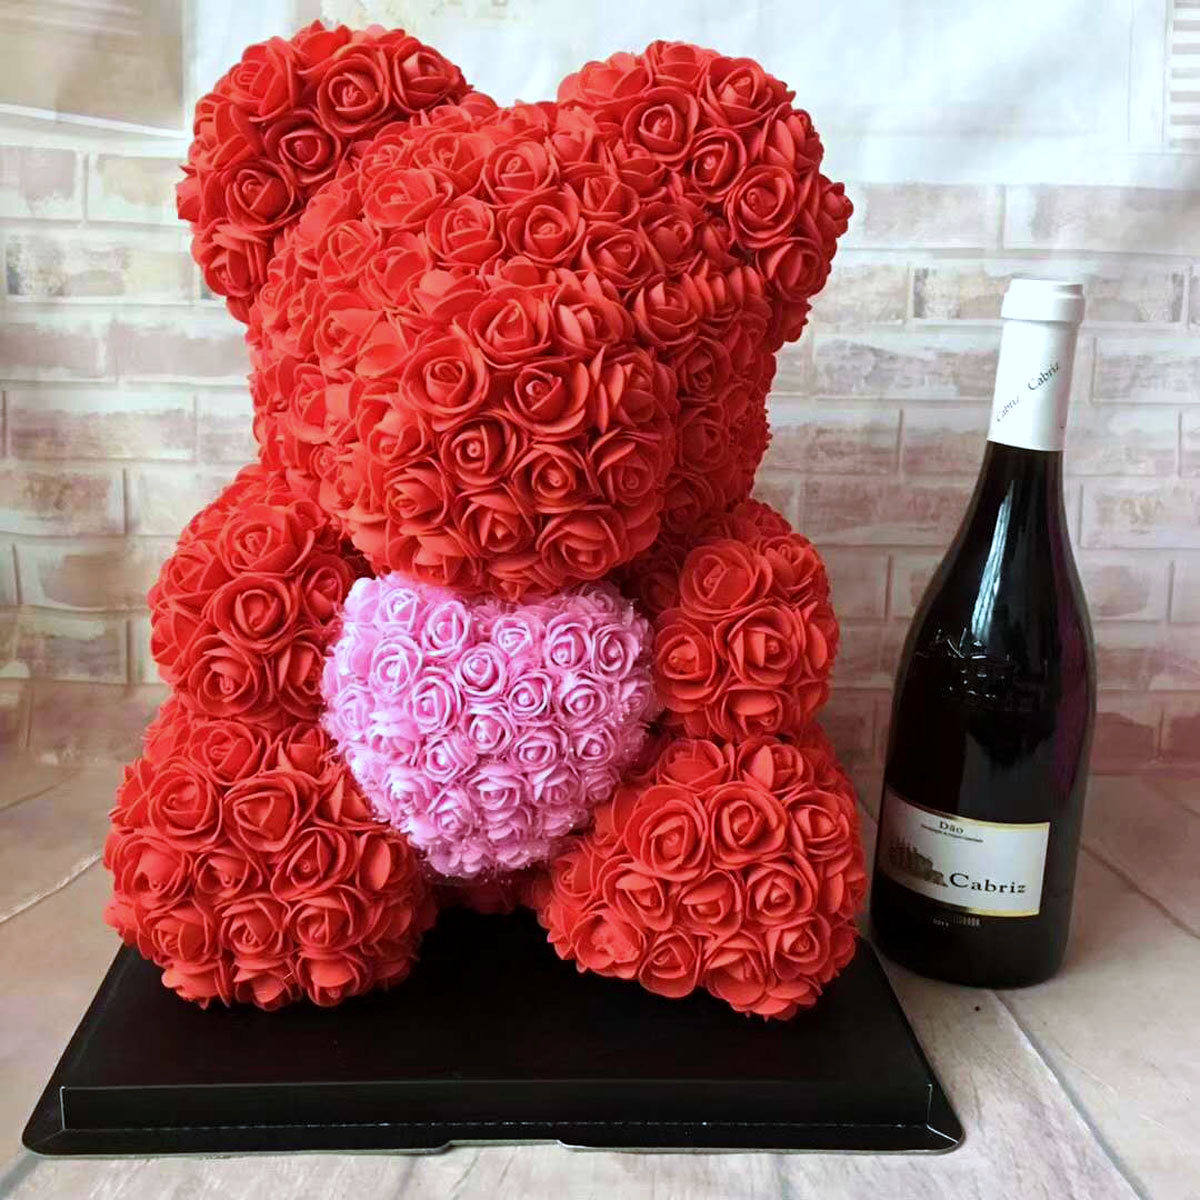 Gift Ideas For Her Valentines
 9 Wine Valentines Day Gift Ideas for Her